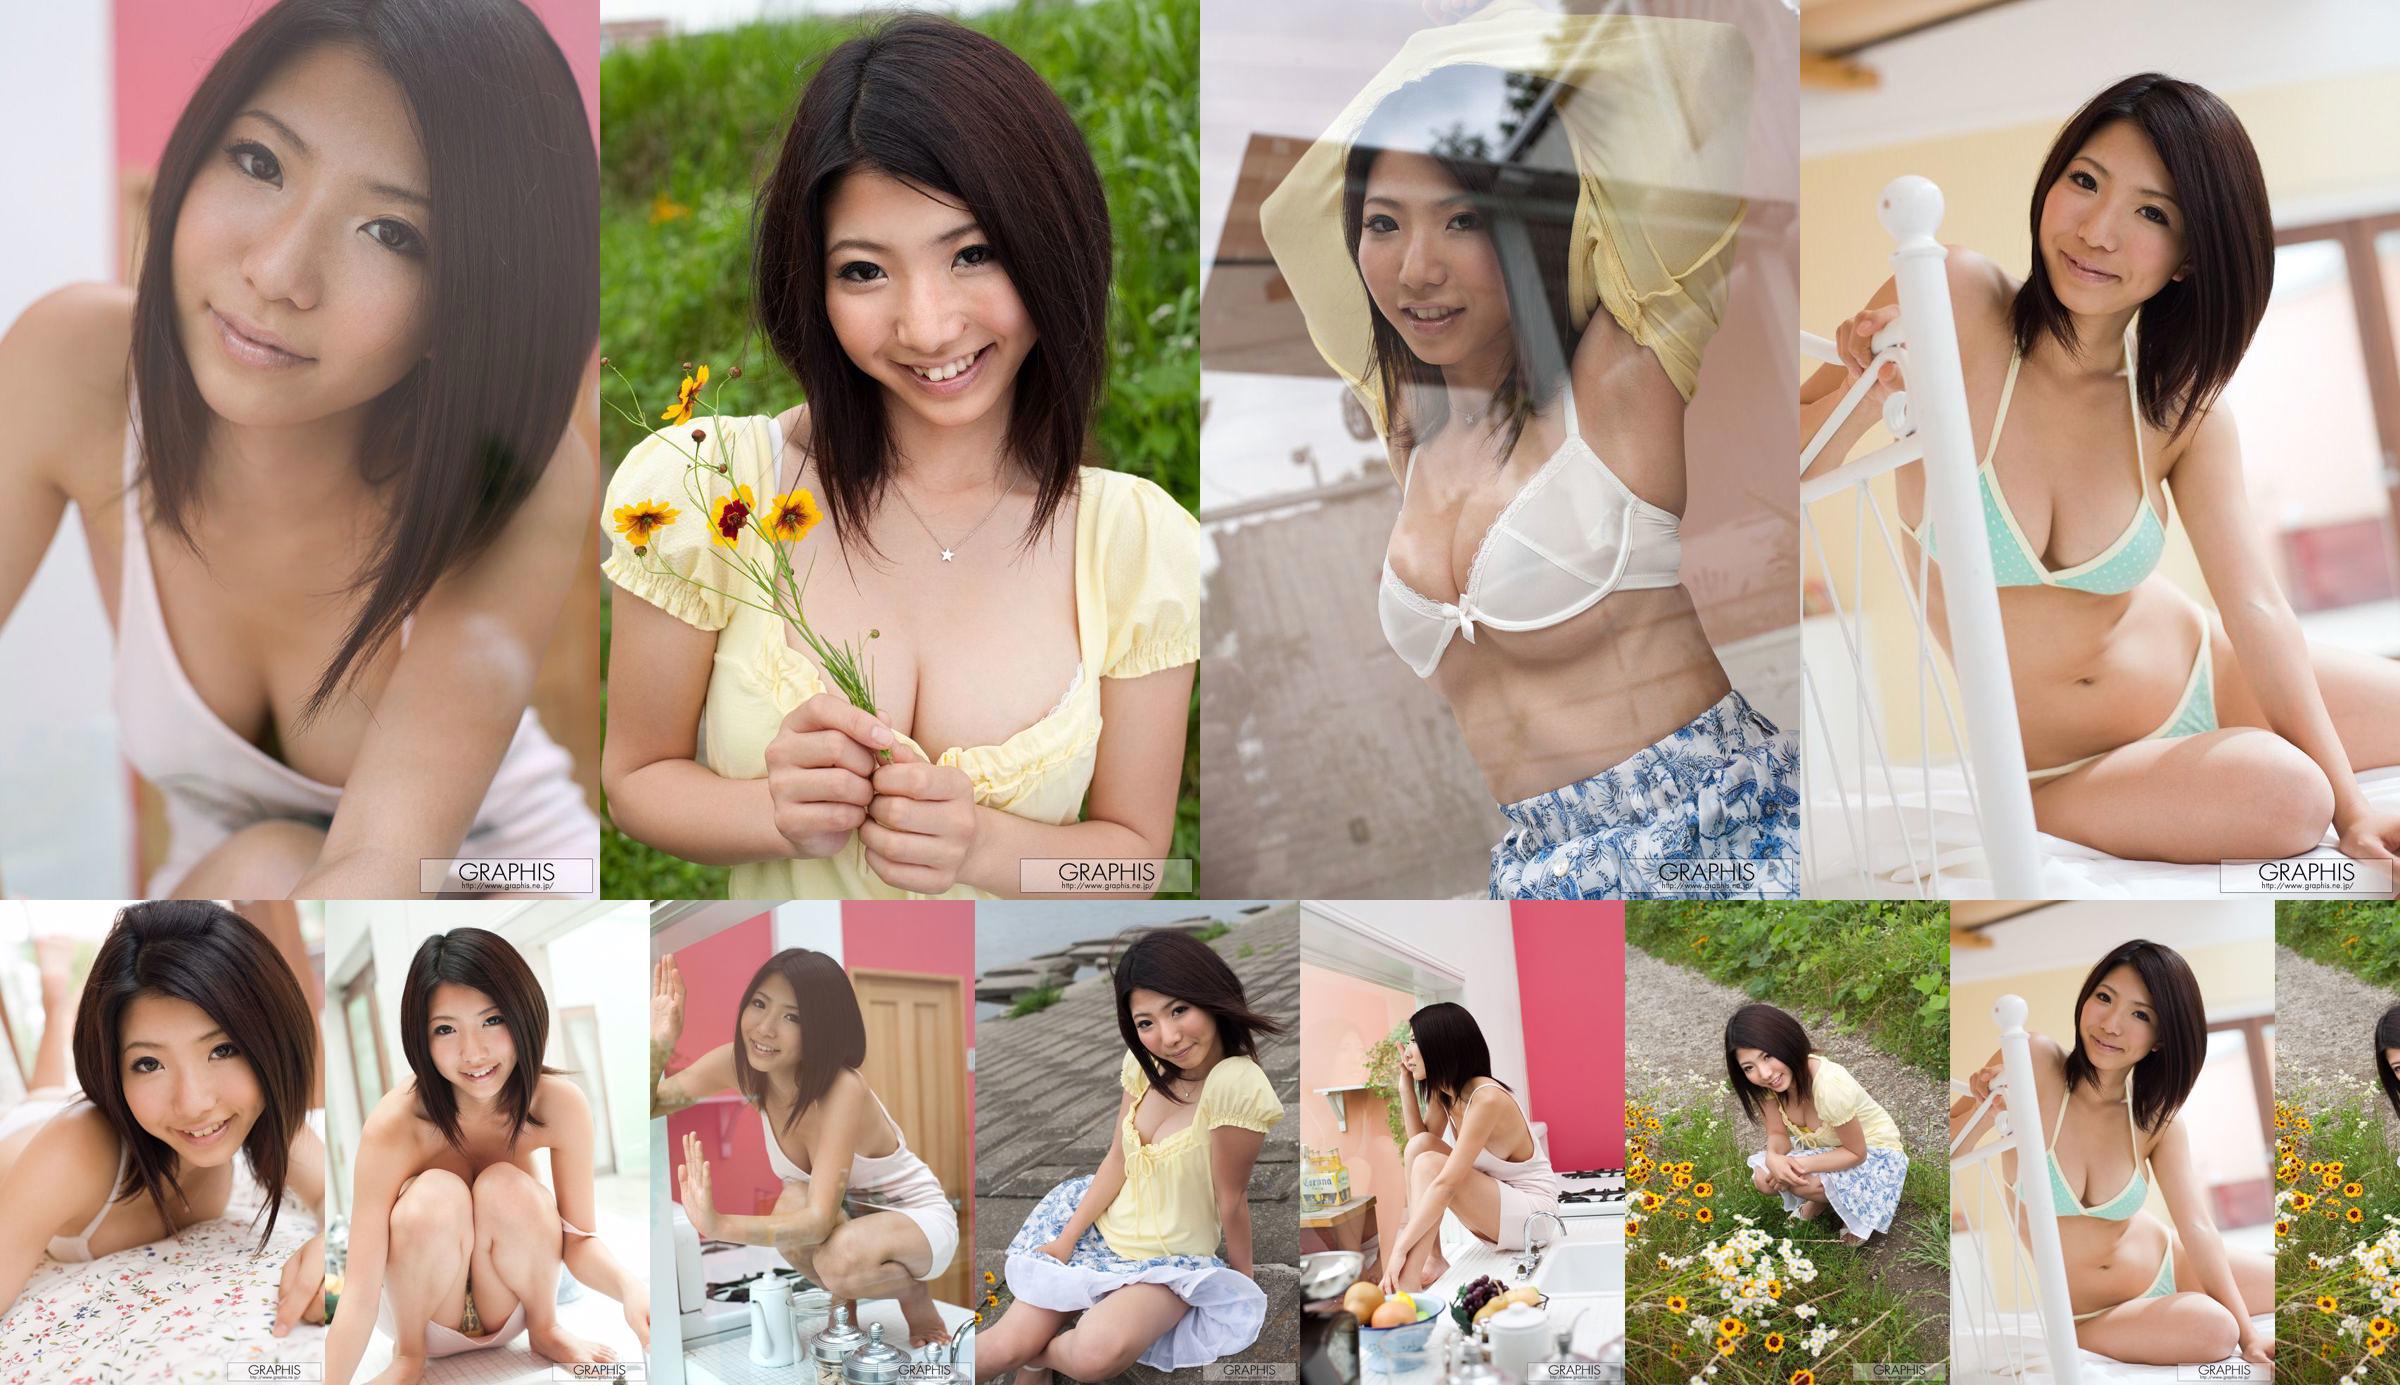 An アン《Simple and Innocent》 [Graphis] Gals No.00c9c2 ページ1